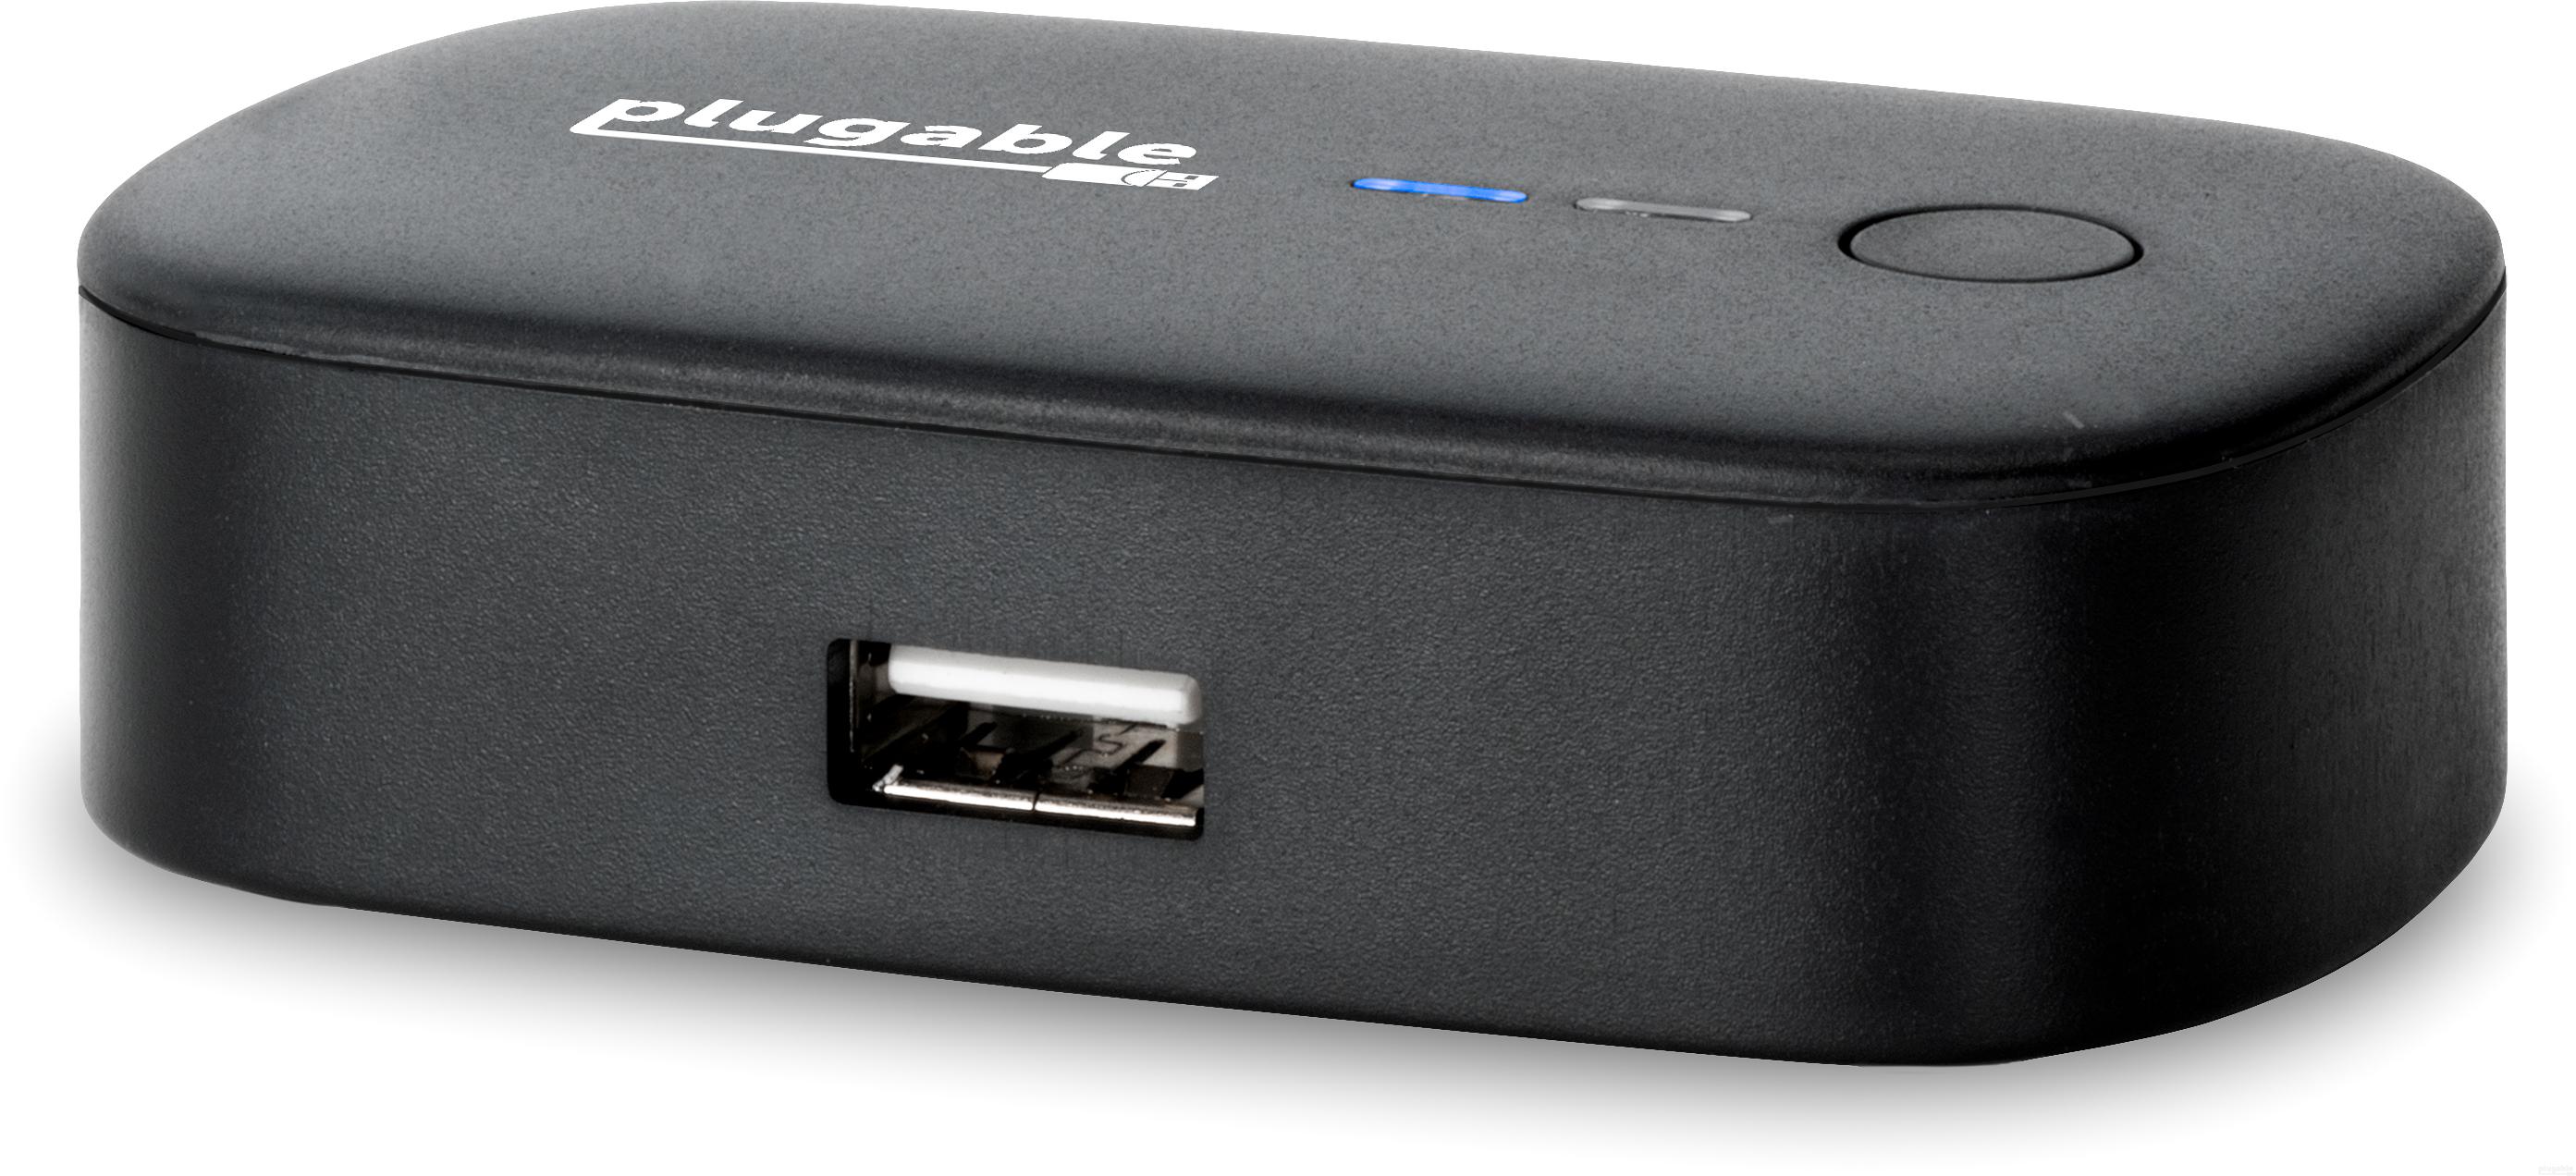 Plugable USB 2.0 Switch for One-Button USB Device Port Sharing Between Two Computers (A/B Switch) - image 1 of 7